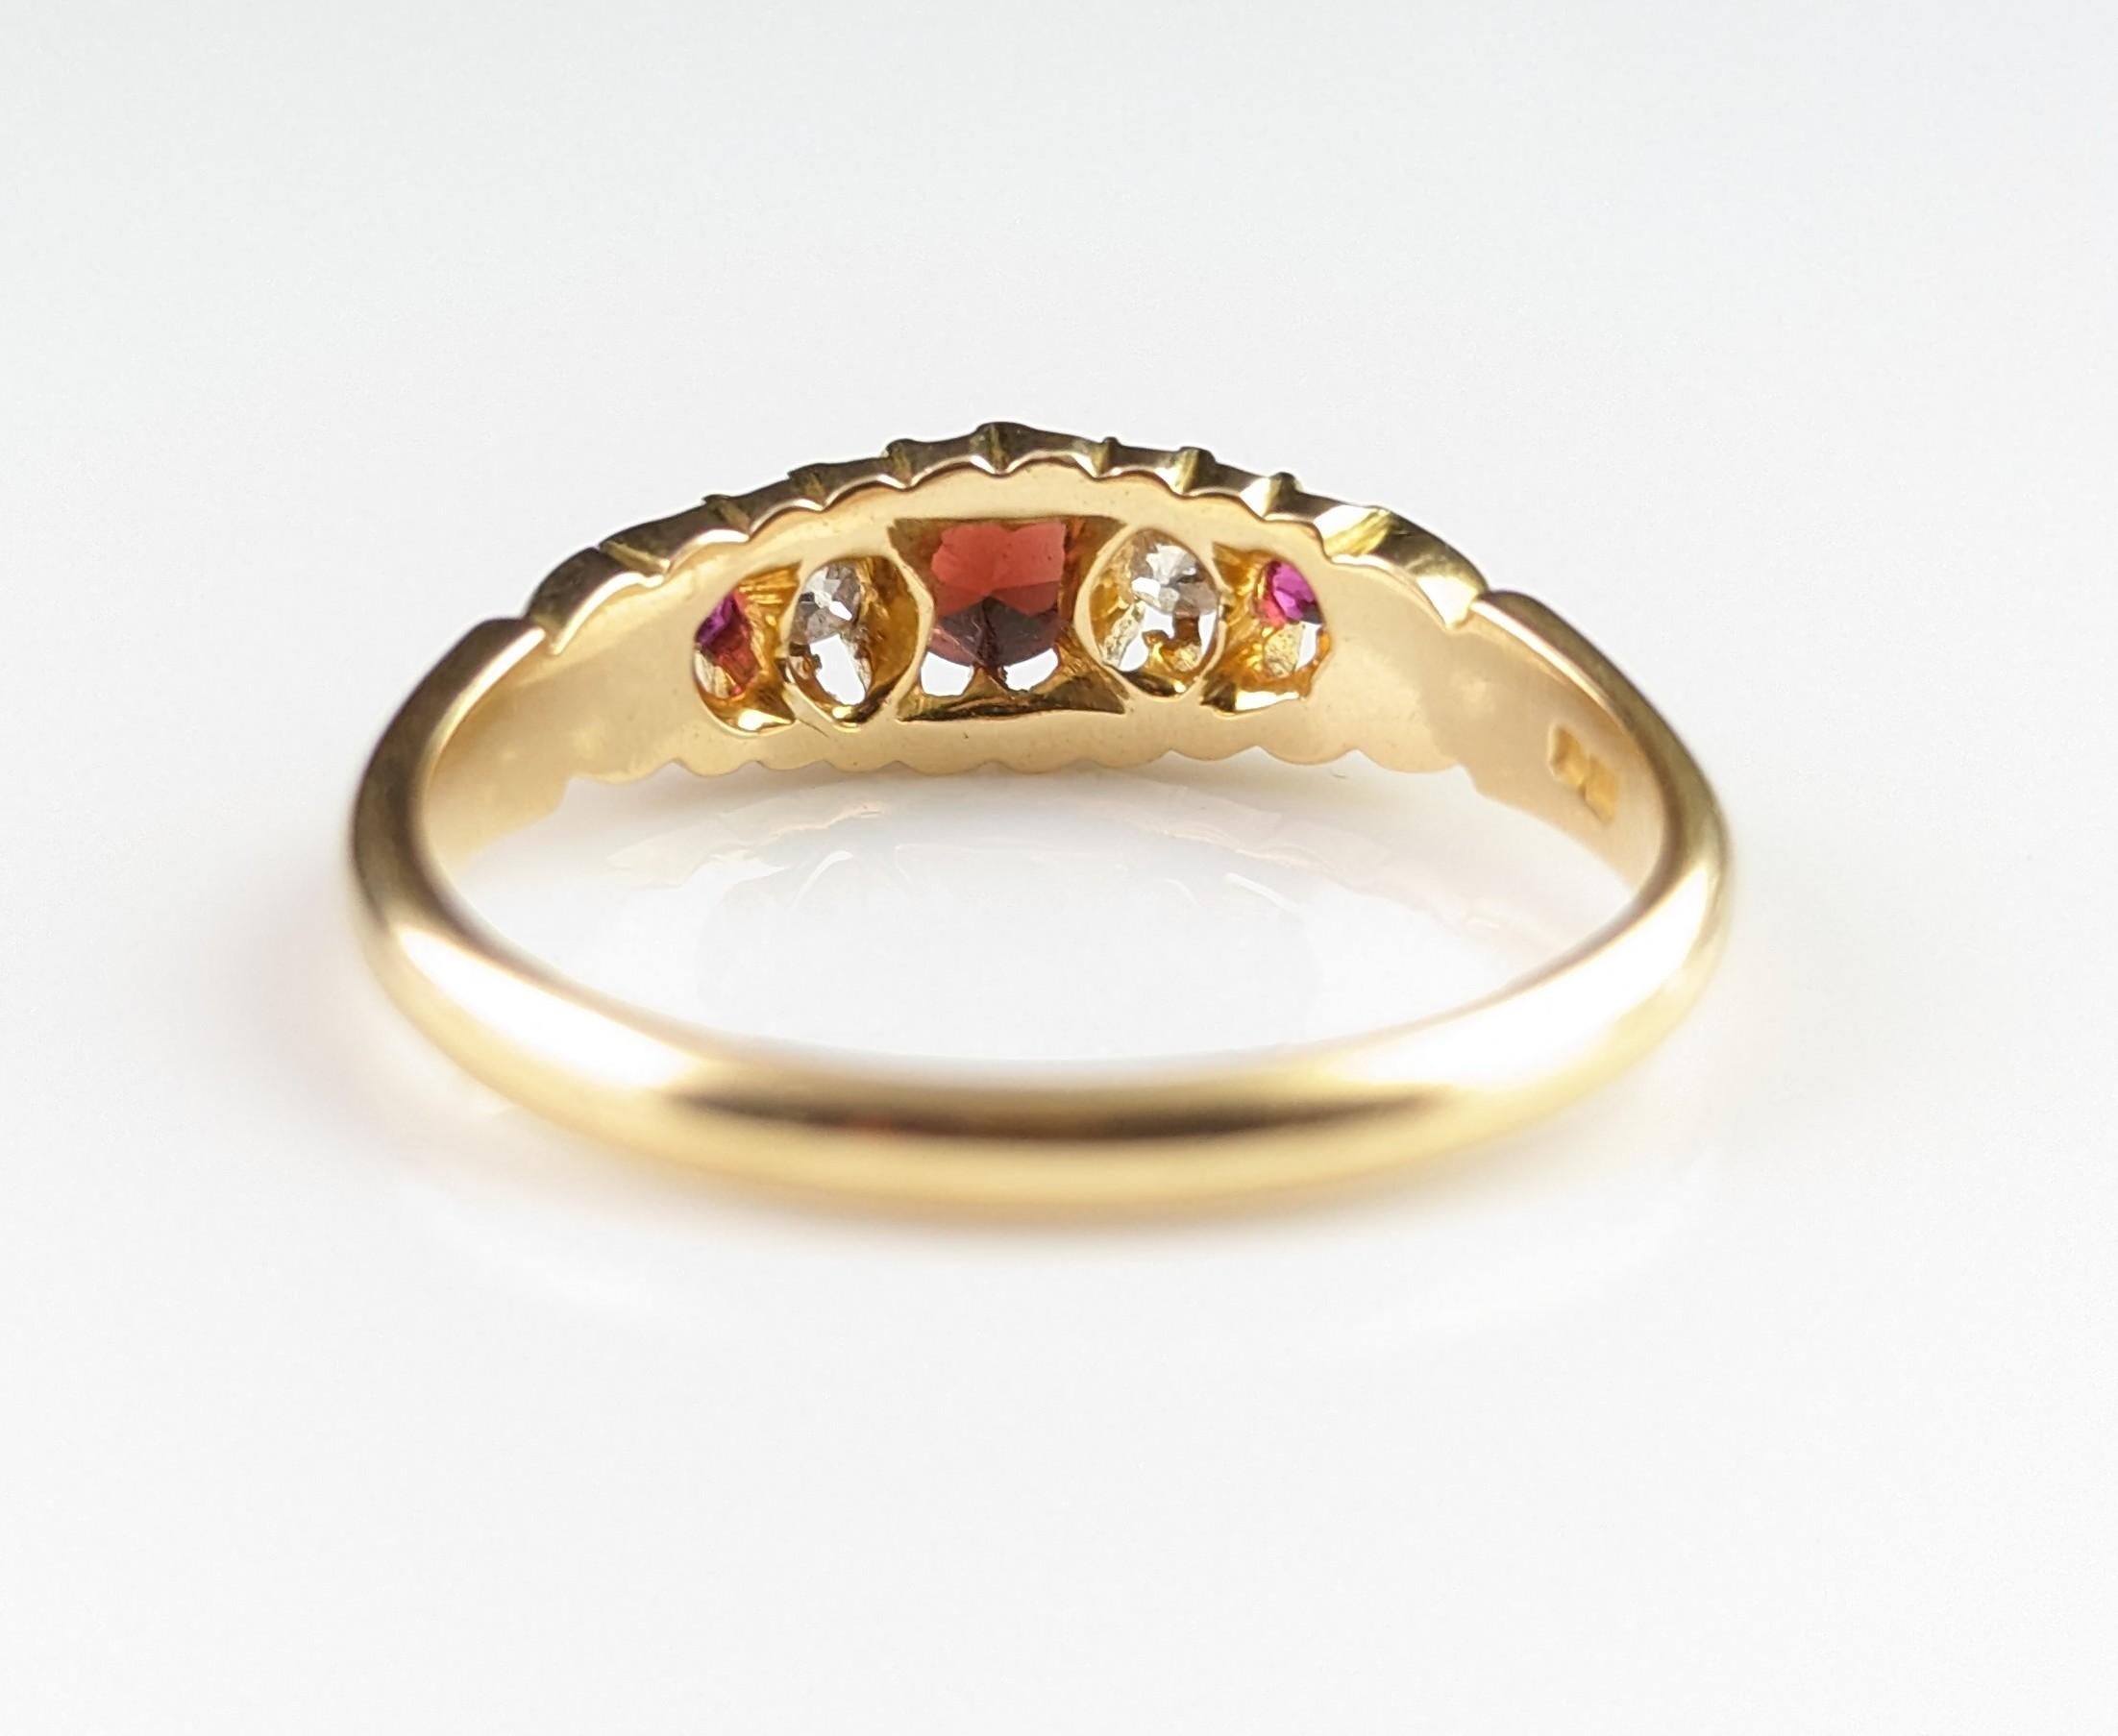 Antique Garnet, Ruby and Diamond Ring, 18ct Gold 11